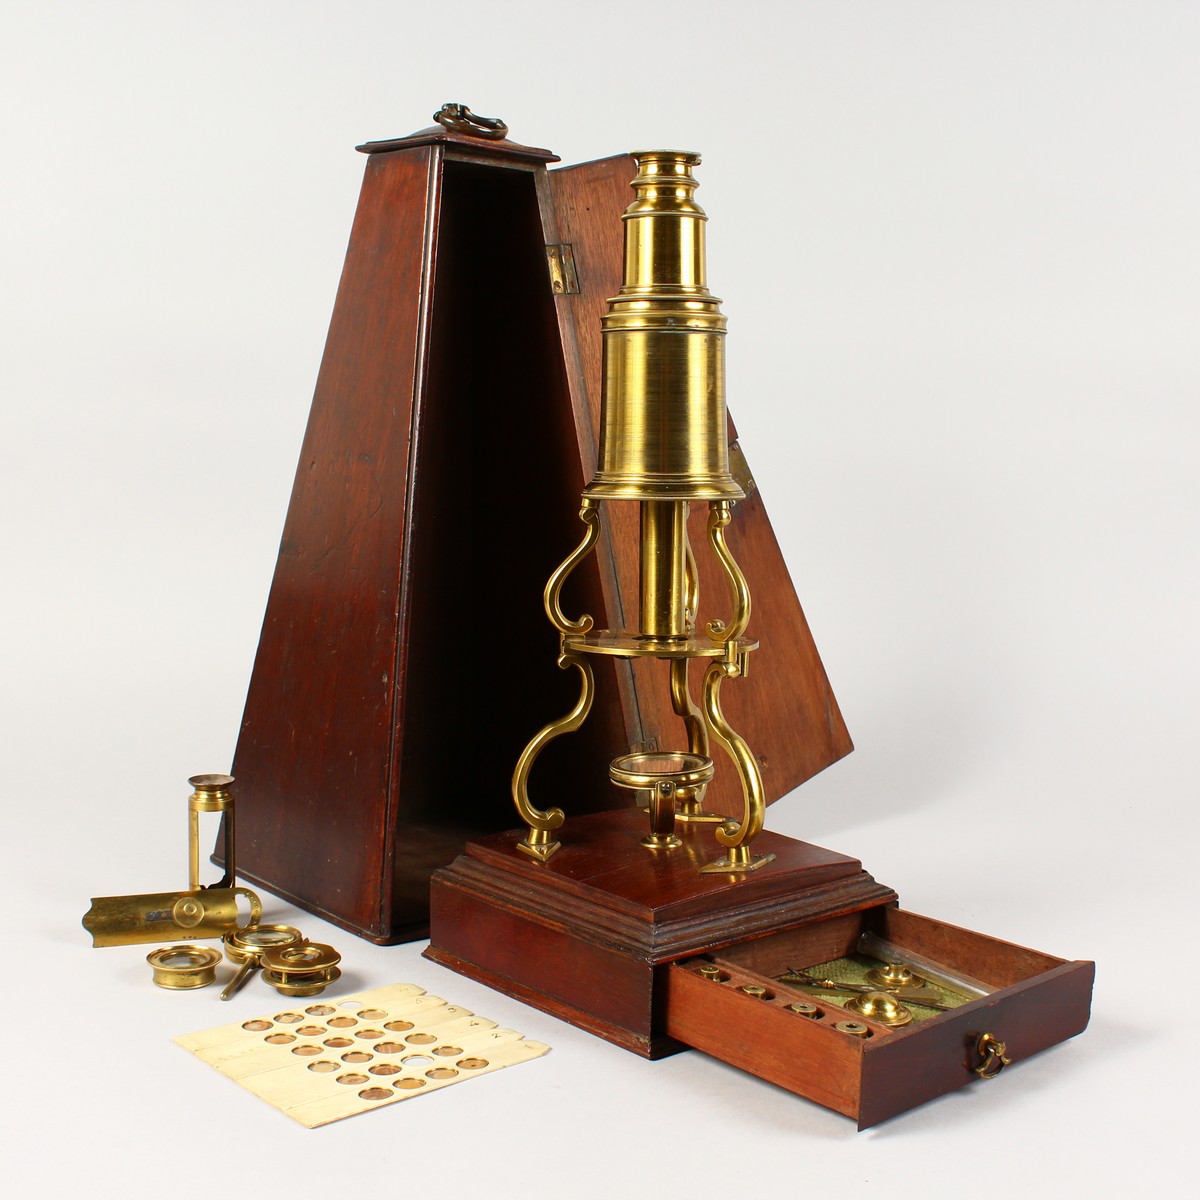 AN 18TH CENTURY BRASS CULPEPER MICROSCOPE by LINCOLN, LONDON, in an oak case, the sliding drawer